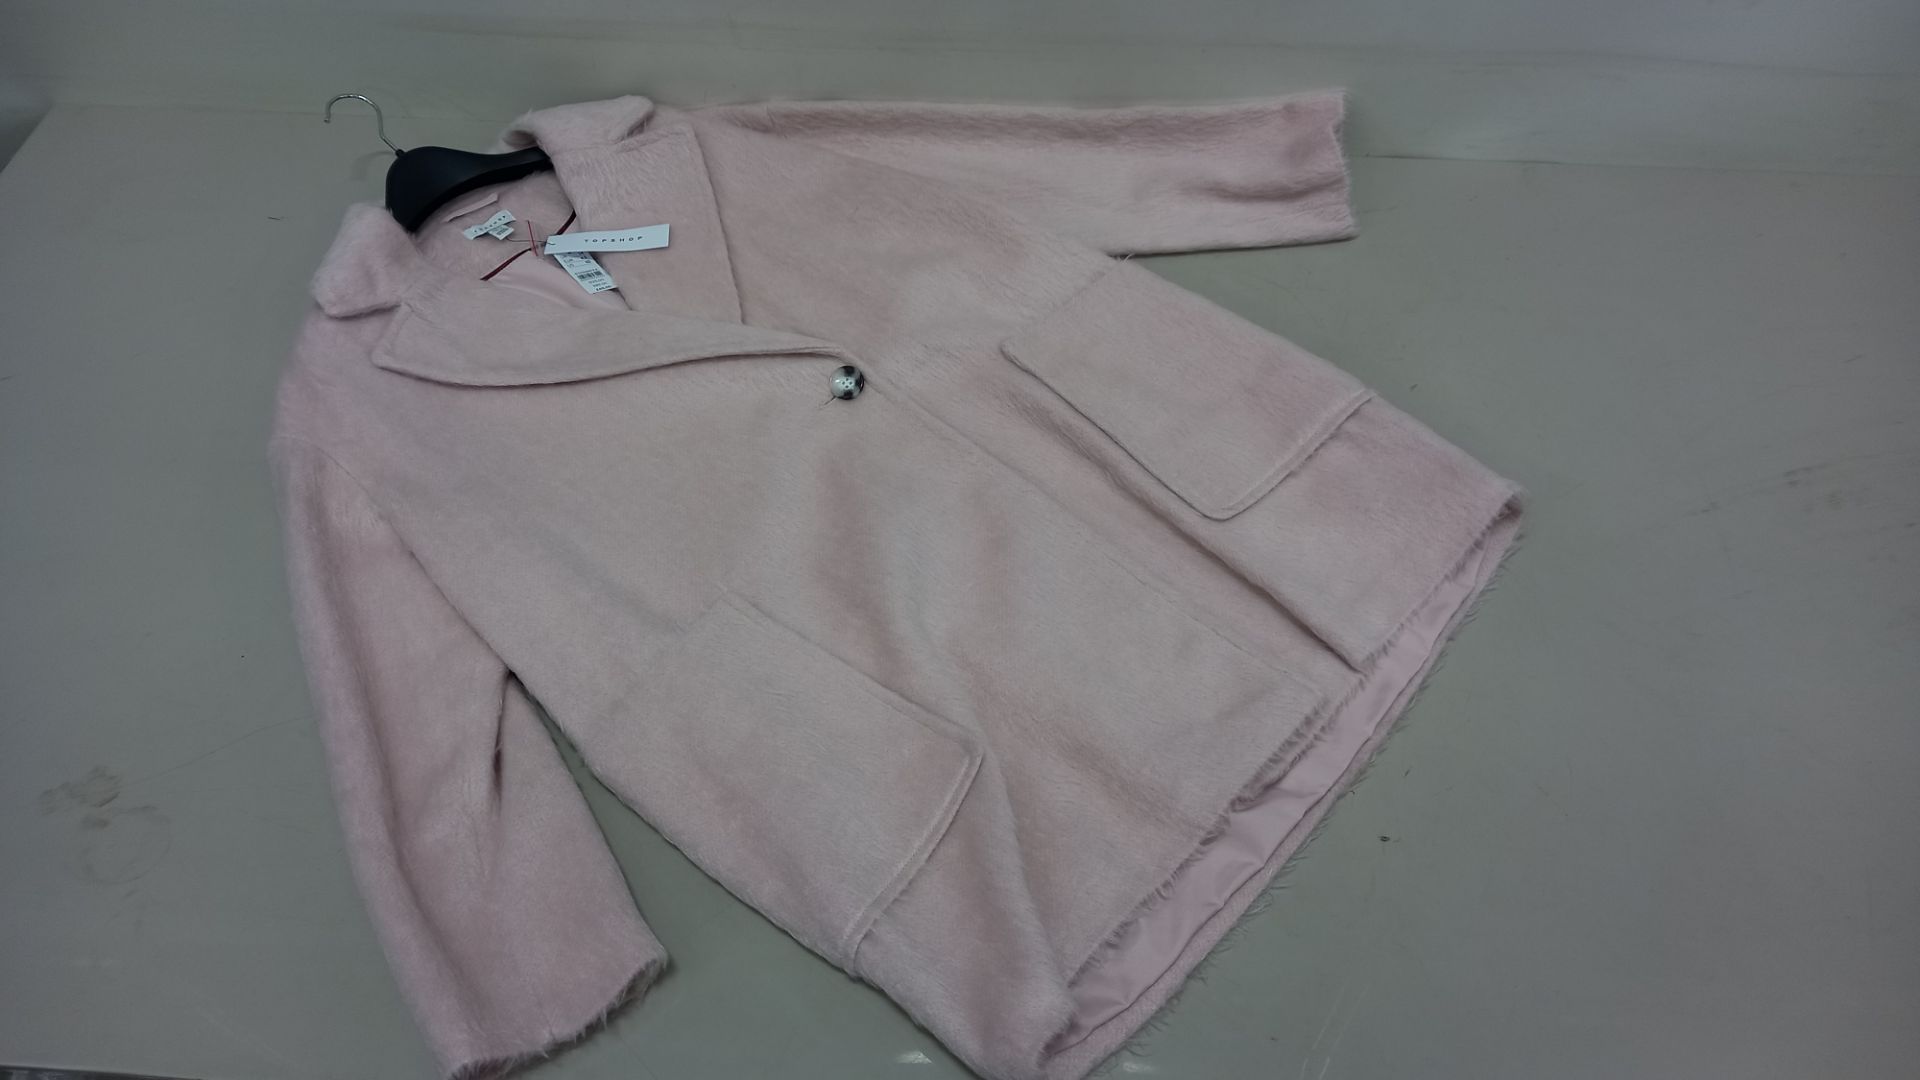 4 X BRAND NEW TOPSHOP PINK FUR BUTTONED COATS / JACKETS SIZE 12 AND 14 RRP £65.00 (TOTAL RRP £260.